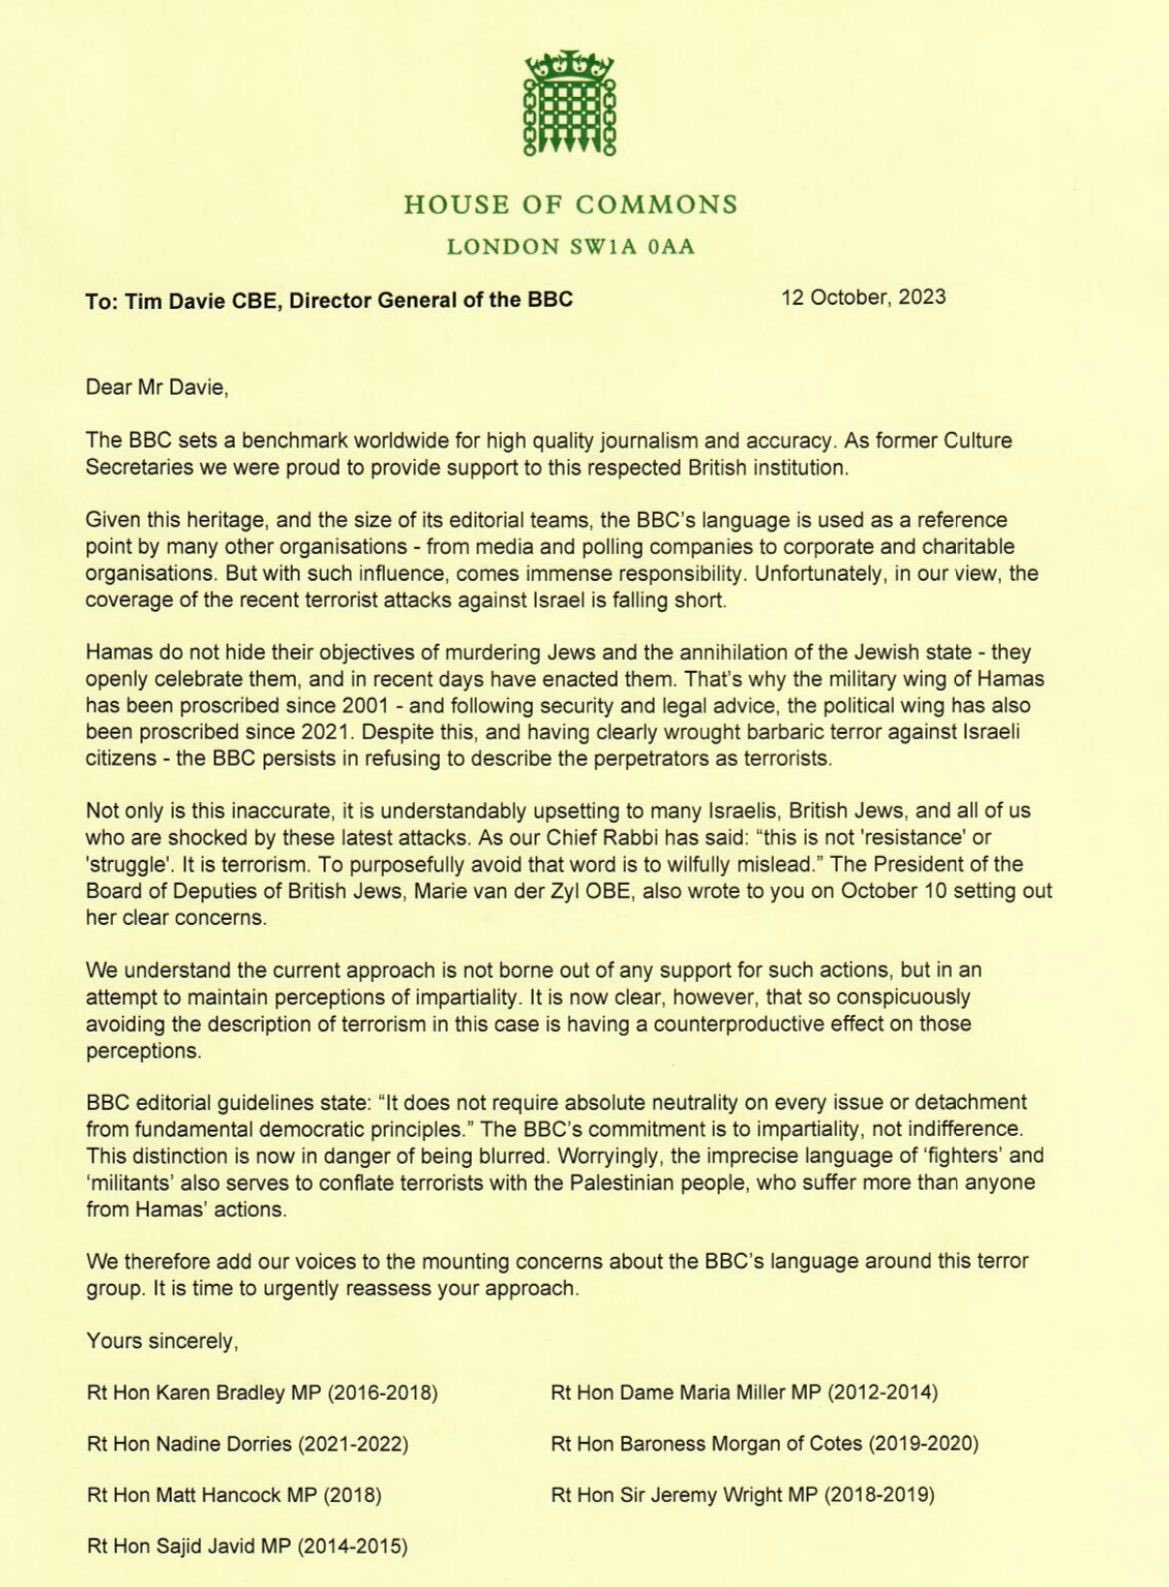 MPs letter to BBC